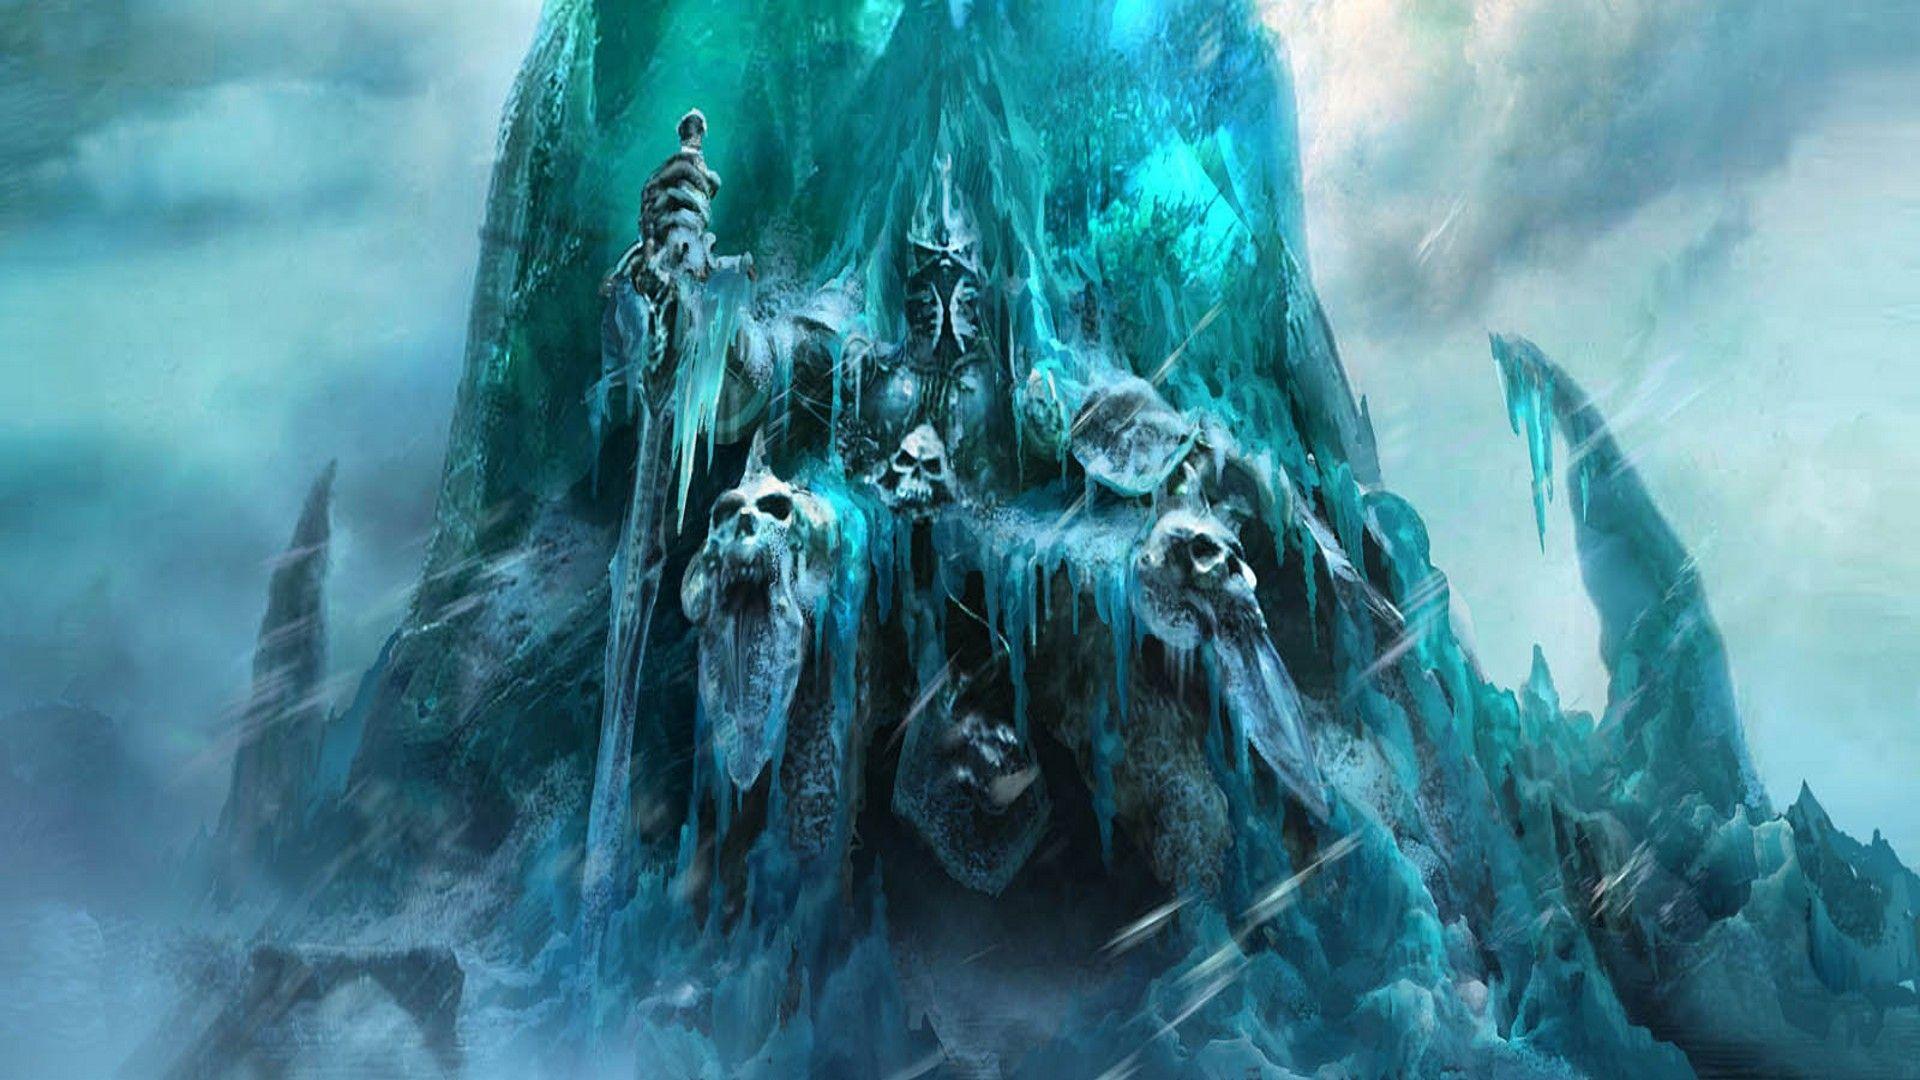 World of Warcraft: Wrath of the Lich King download. PC Games Archive